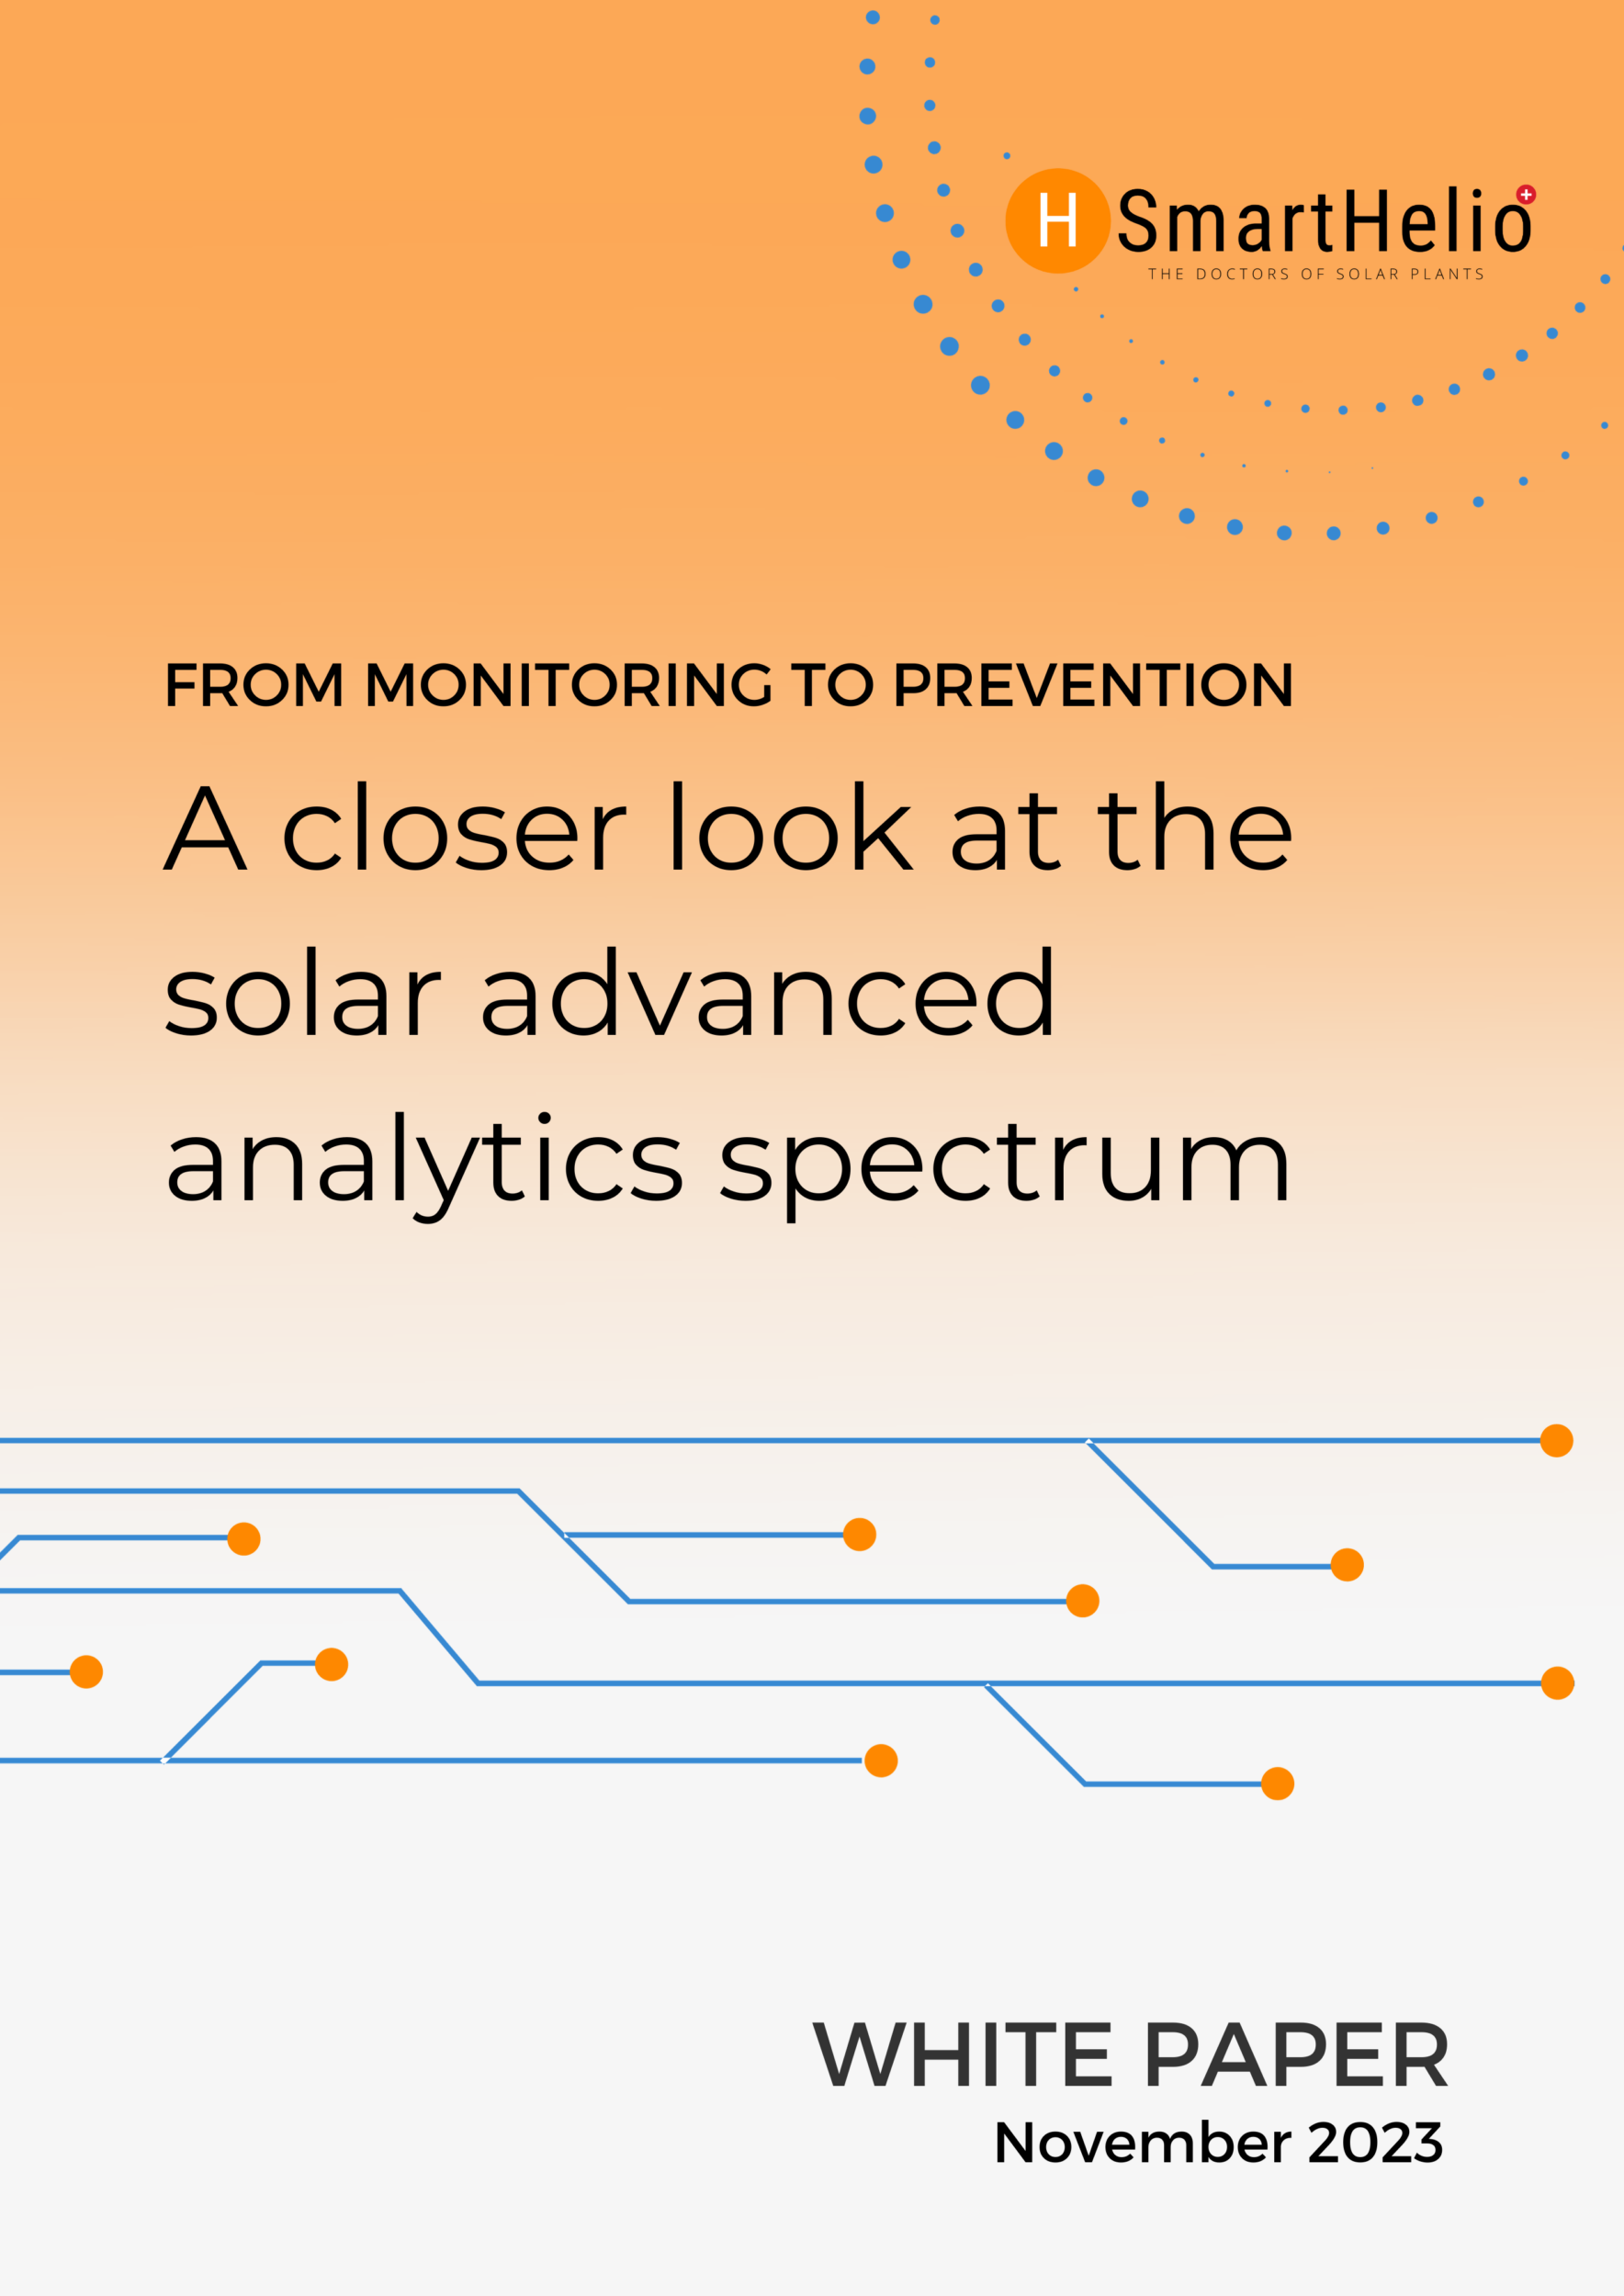 From monitoring to prevention: A closer look at the advanced analytics spectrum